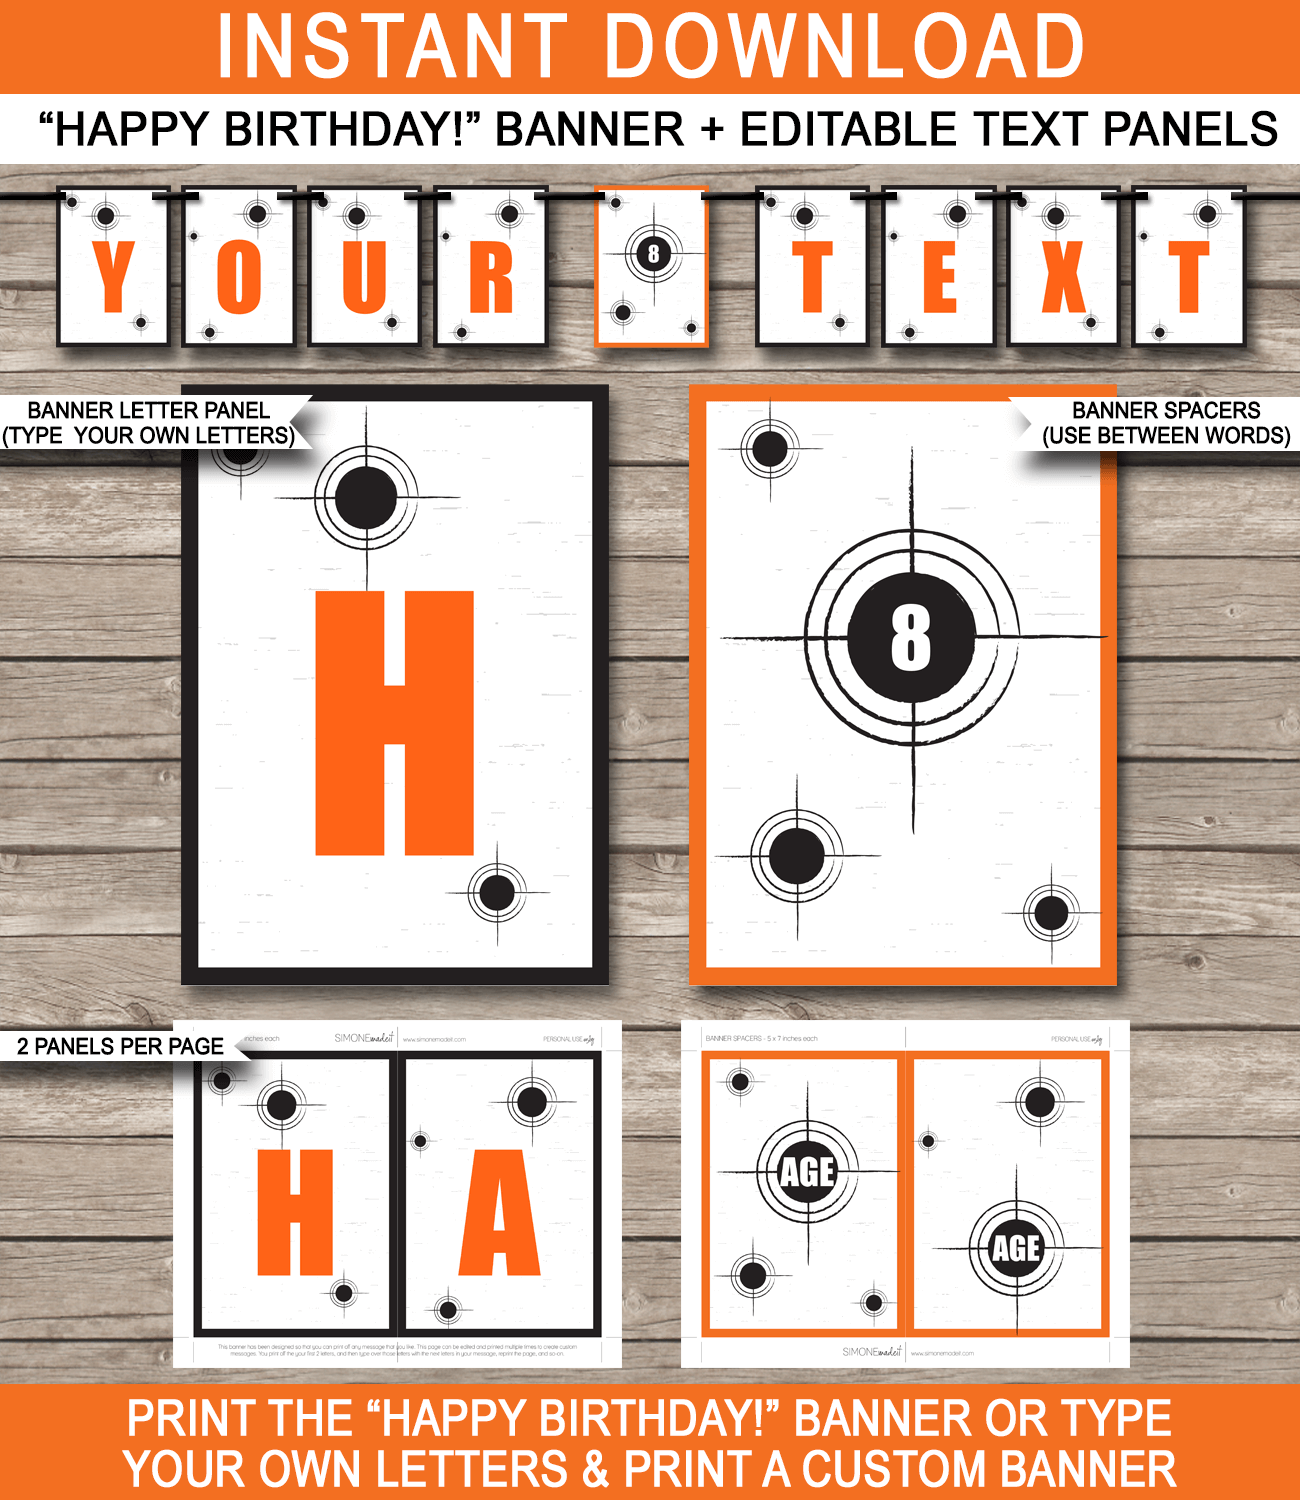 Laser Tag Birthday Banner Template - Laser Tag Bunting - Birthday Party - Orange and Black - Editable and Printable DIY Template - INSTANT DOWNLOAD $4.50 via simonemadeit.com